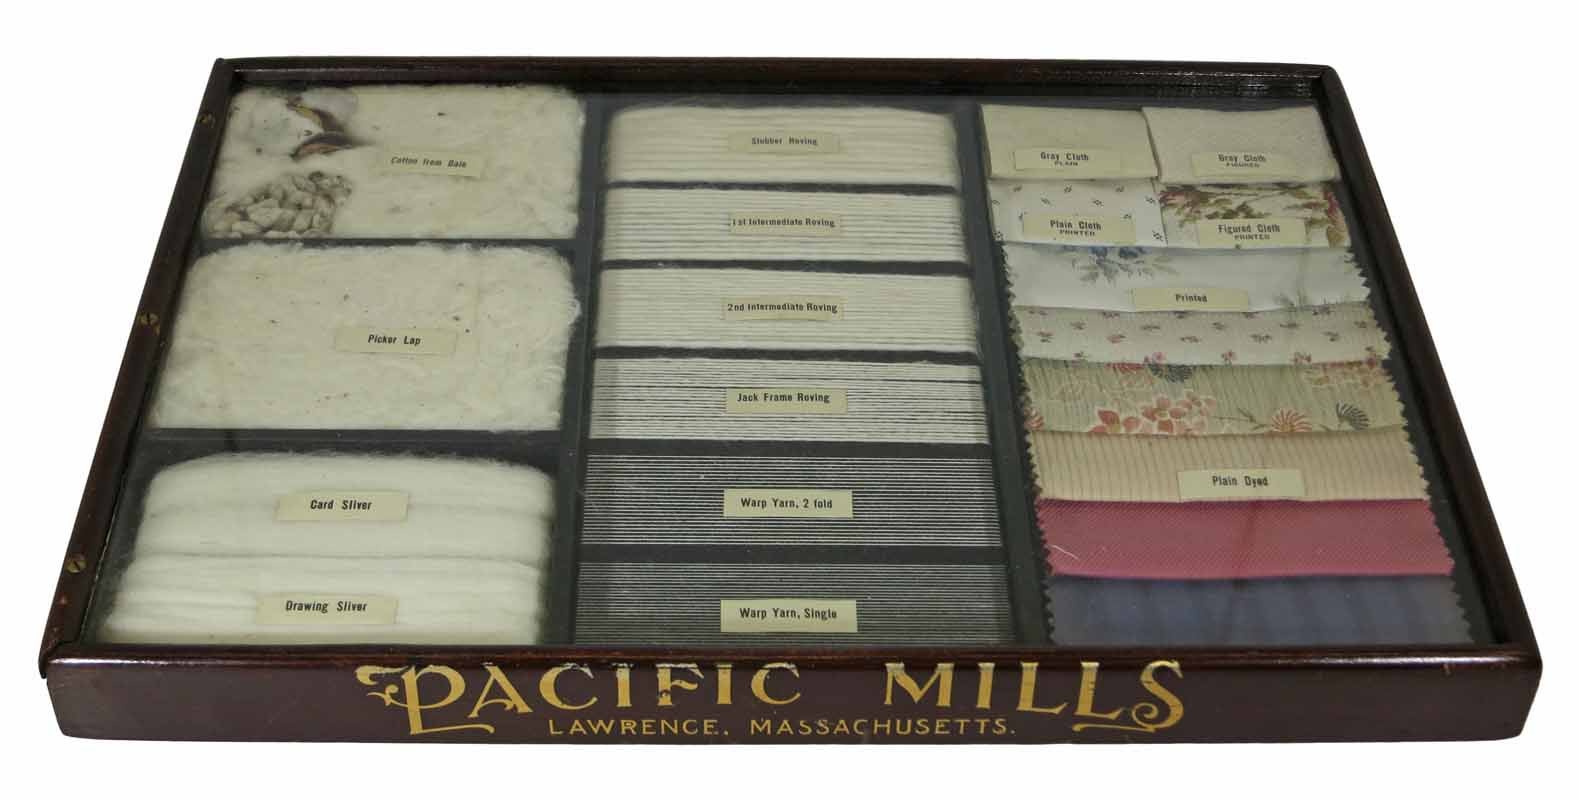 [Textile Sample Display Case] - PACIFIC MILLS. Cotton. Wooden Display Case